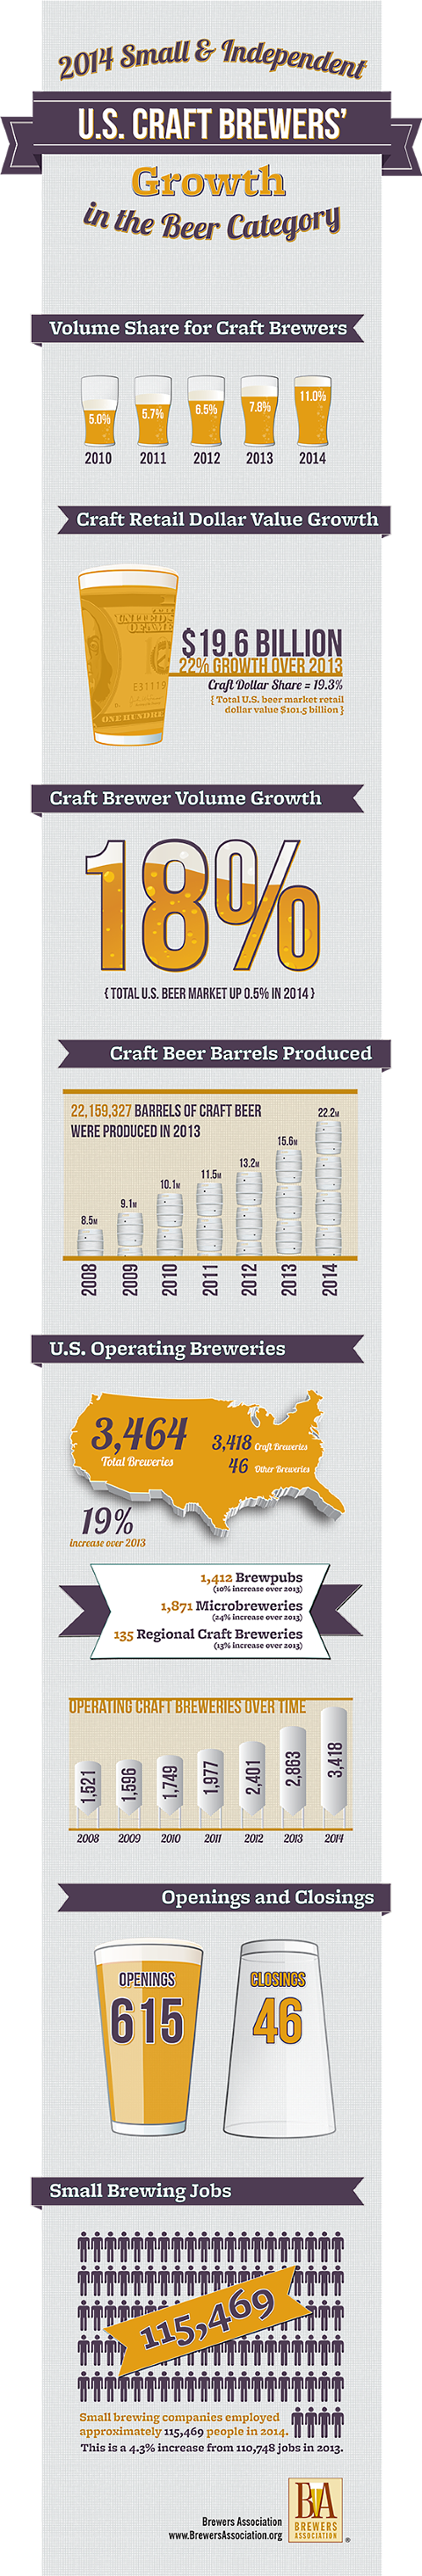 2014 craft beer expansion infographic